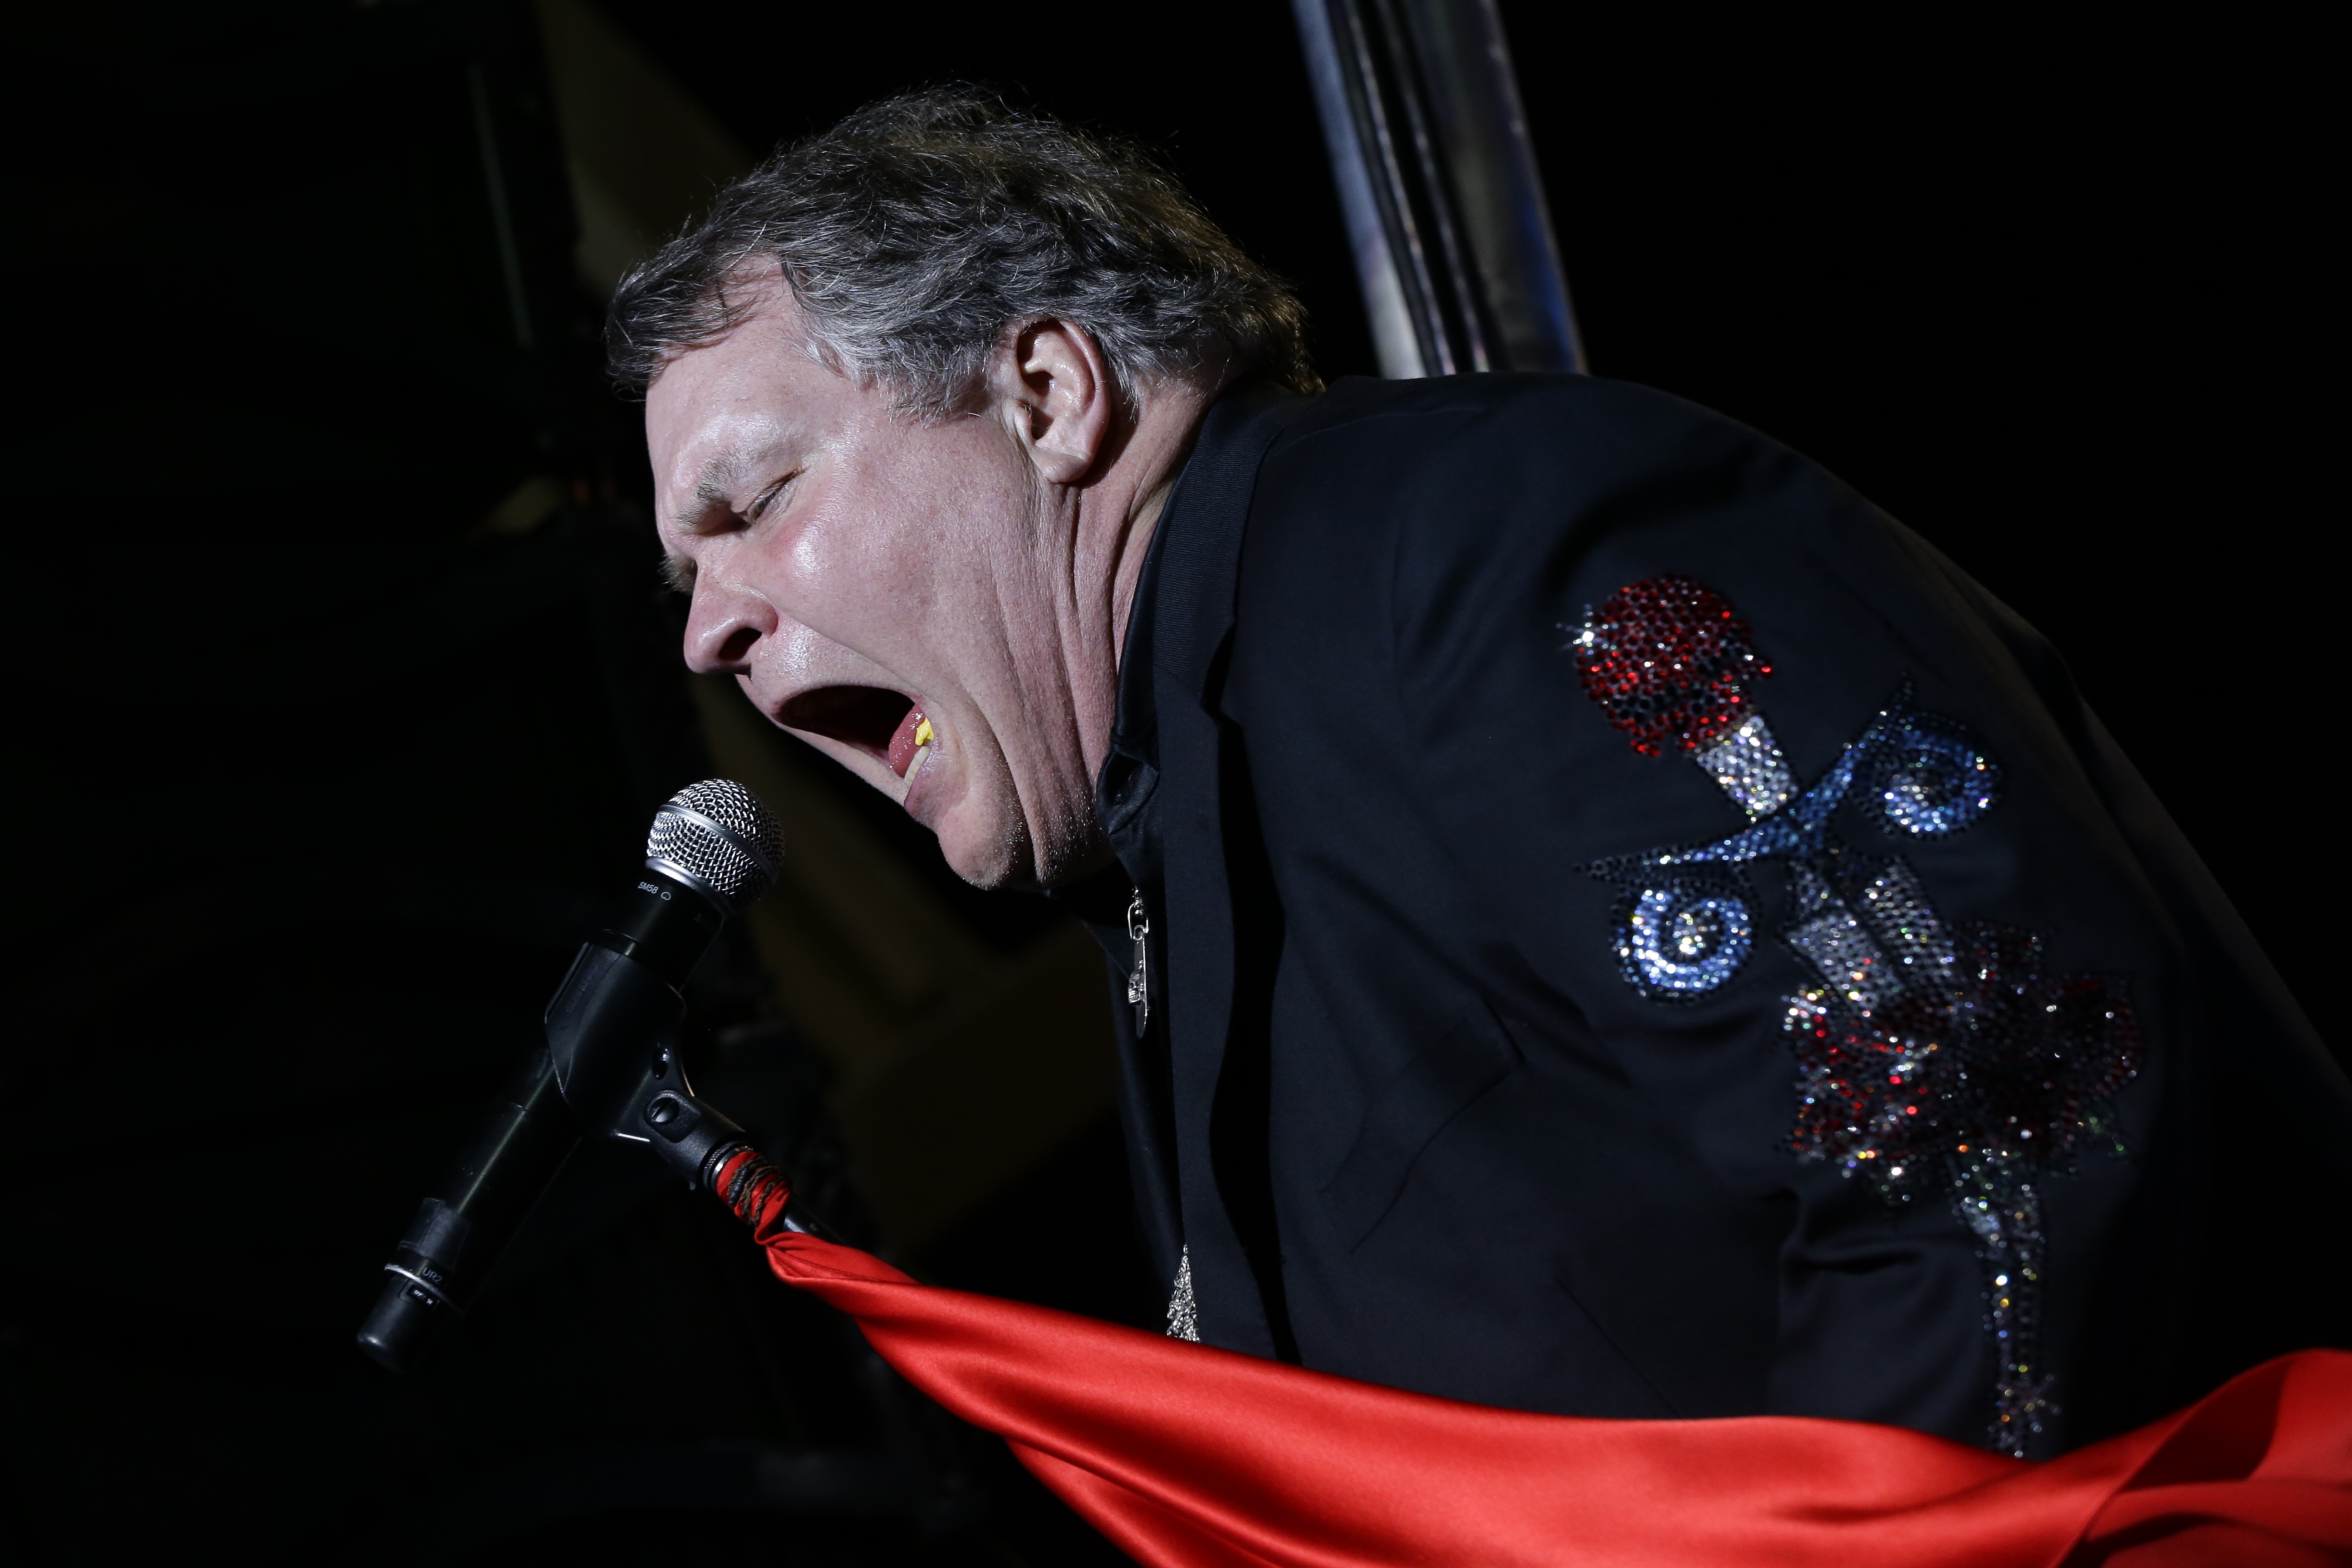 Performer Meat Loaf sings into a microphone and waves a red cloth